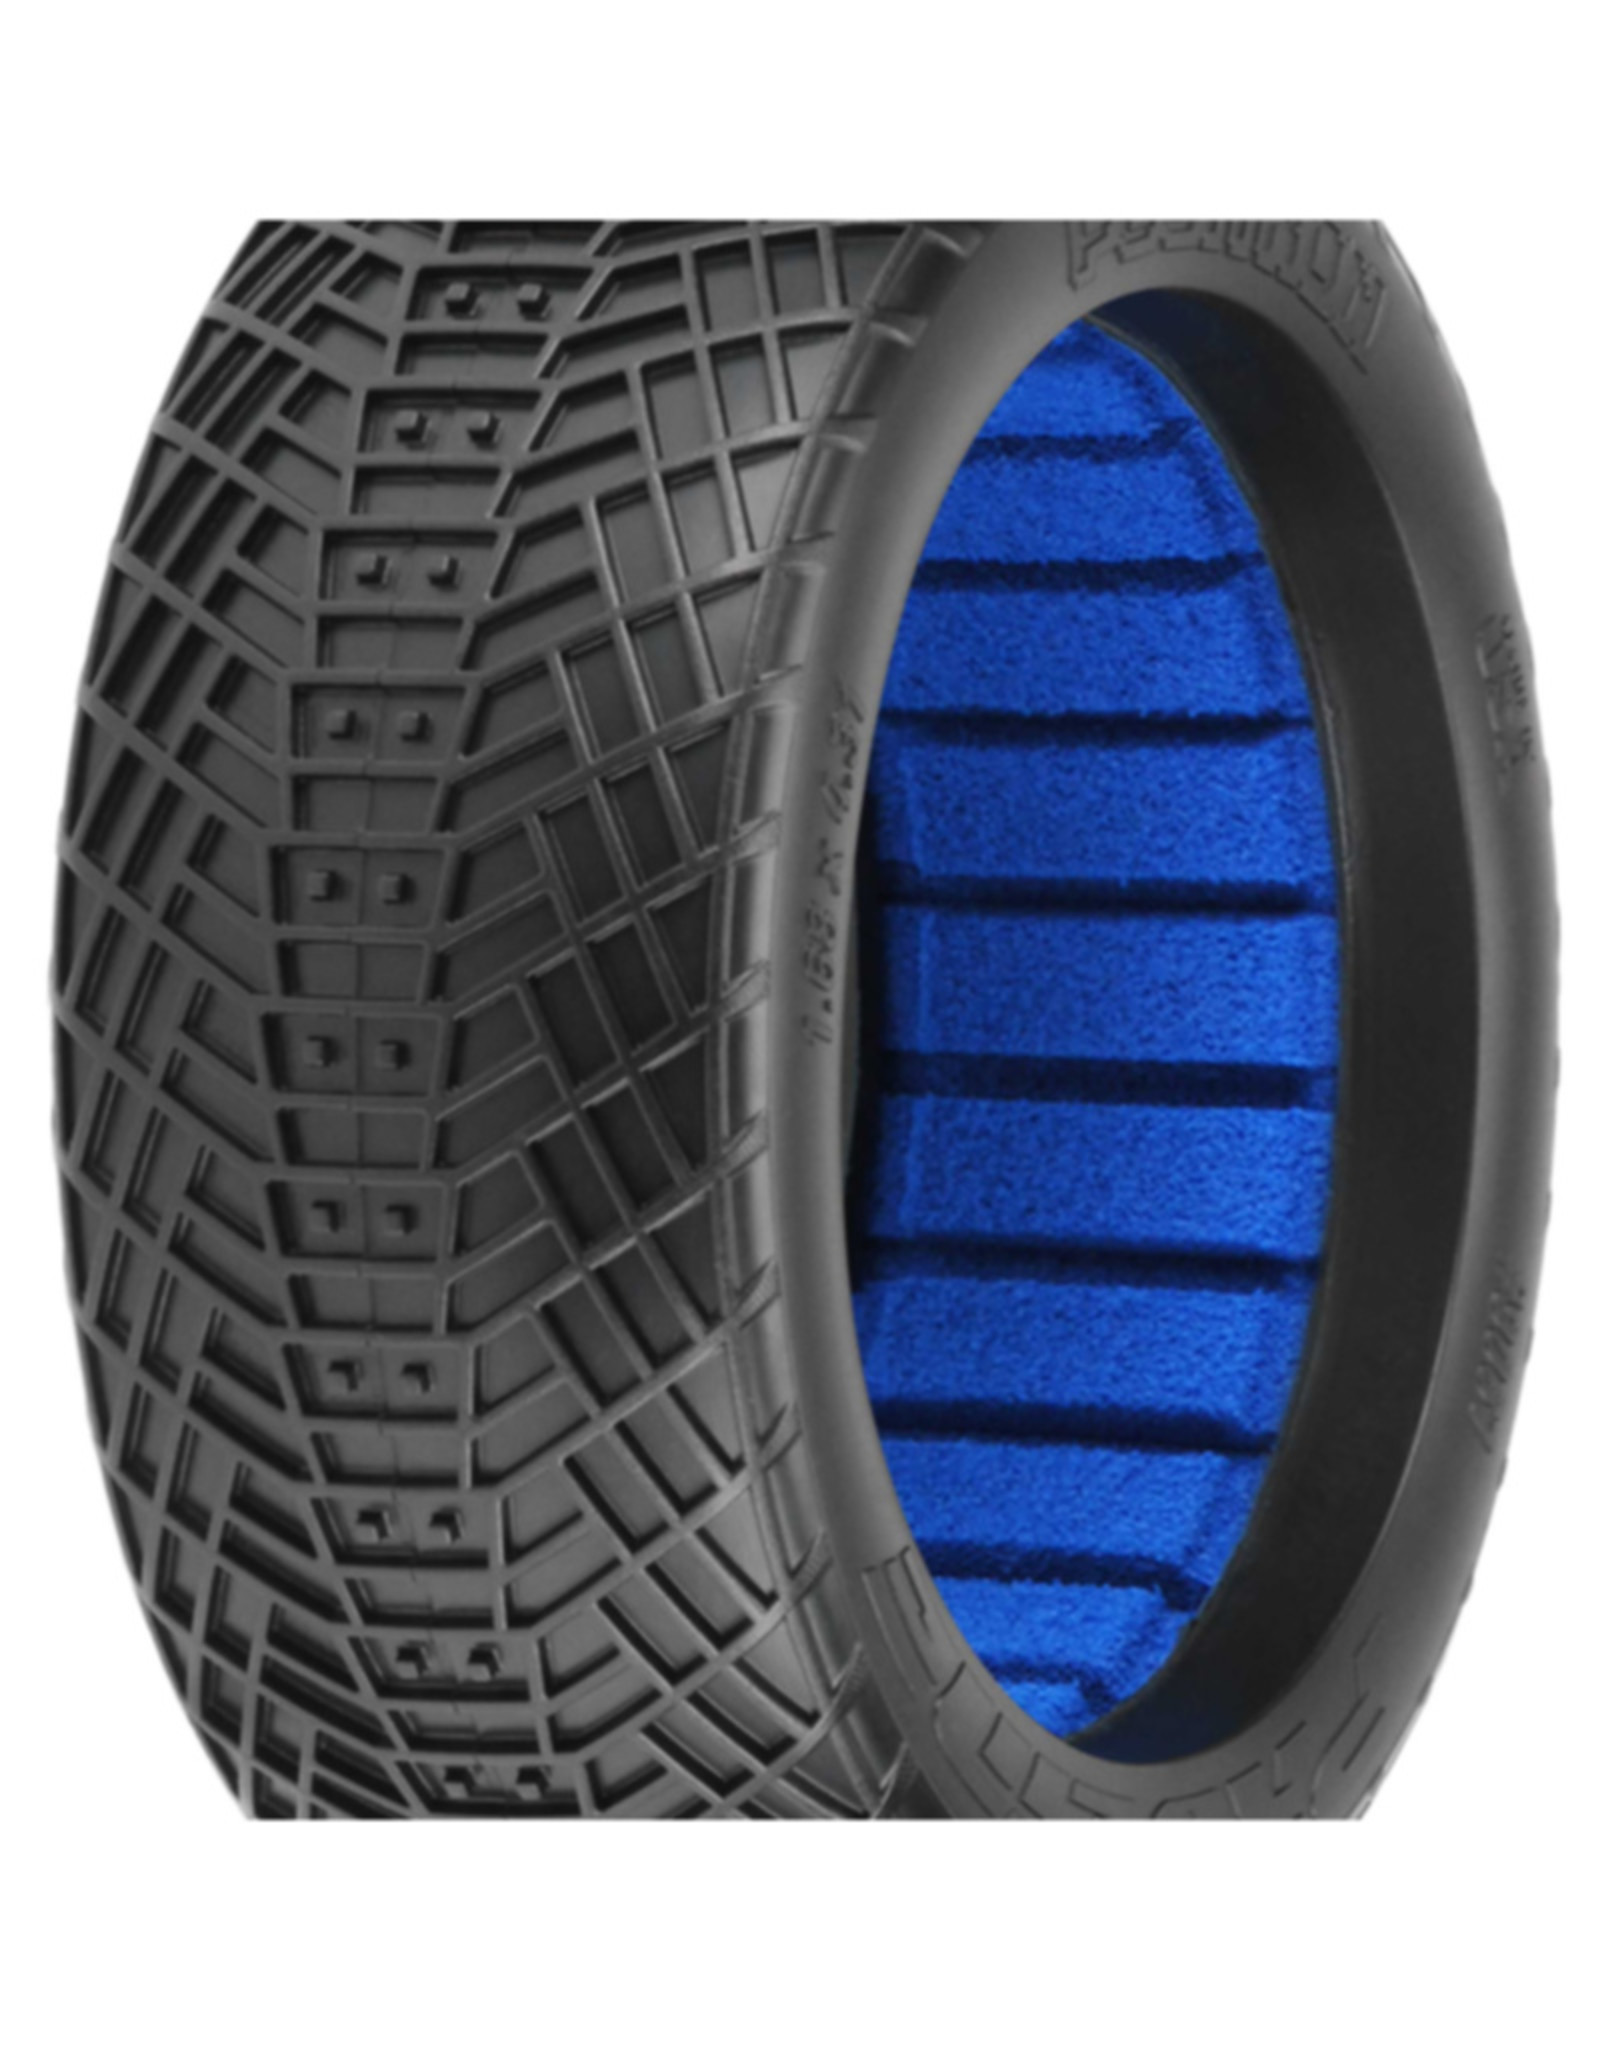 Pro-Line Racing PRO906117 1/8 Positron MC Clay Off Road Tire: Buggy(2)